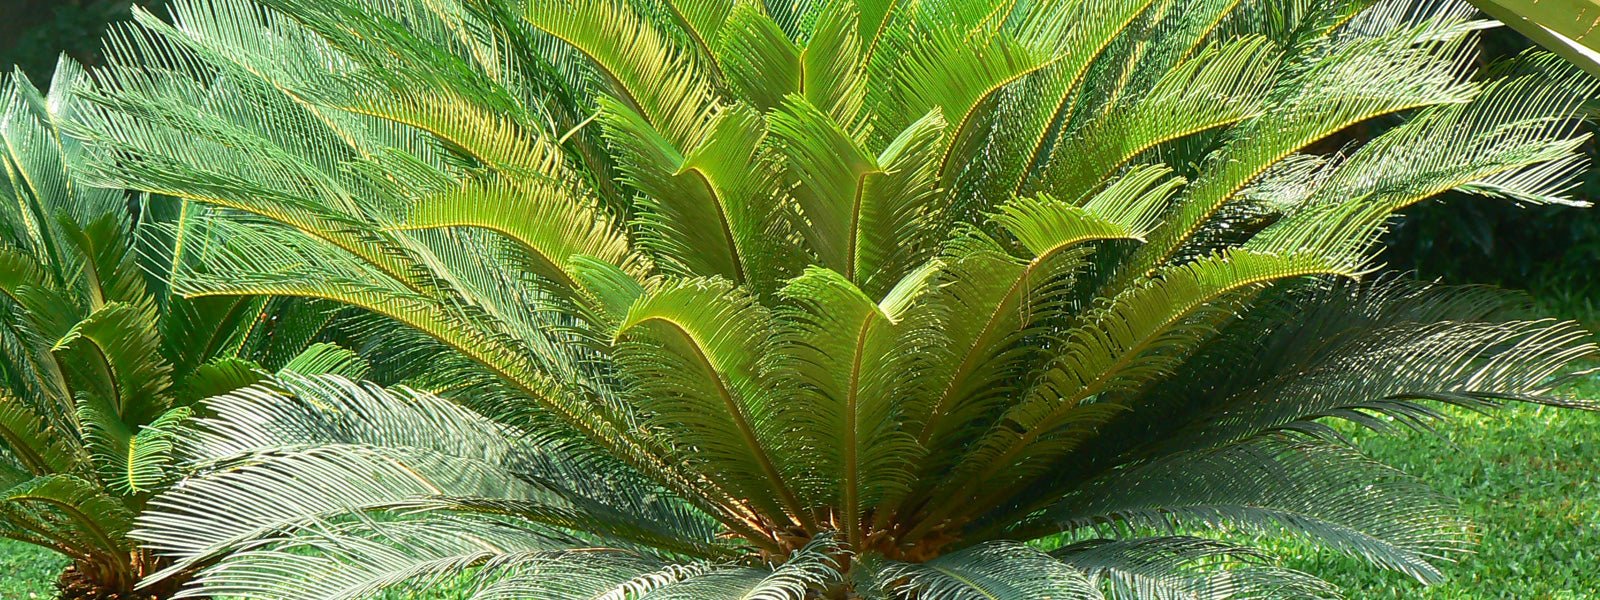 Top 10 Cycads For Your Garden